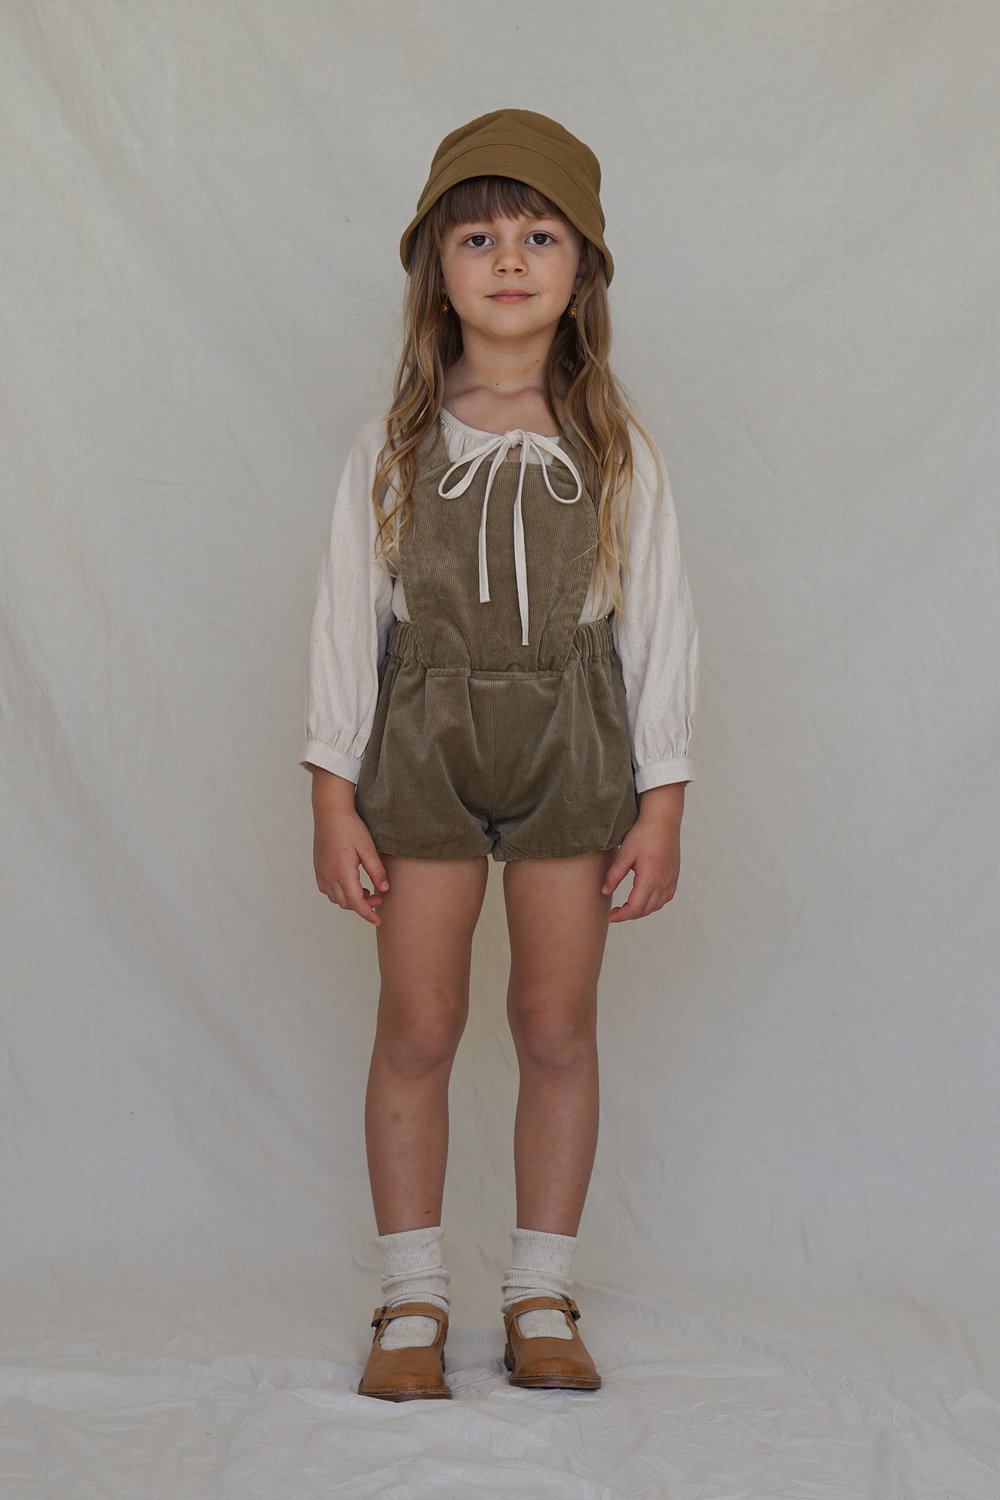 House of Paloma Amour Blouse in Naturel | 30% OFF | Children of the Wild